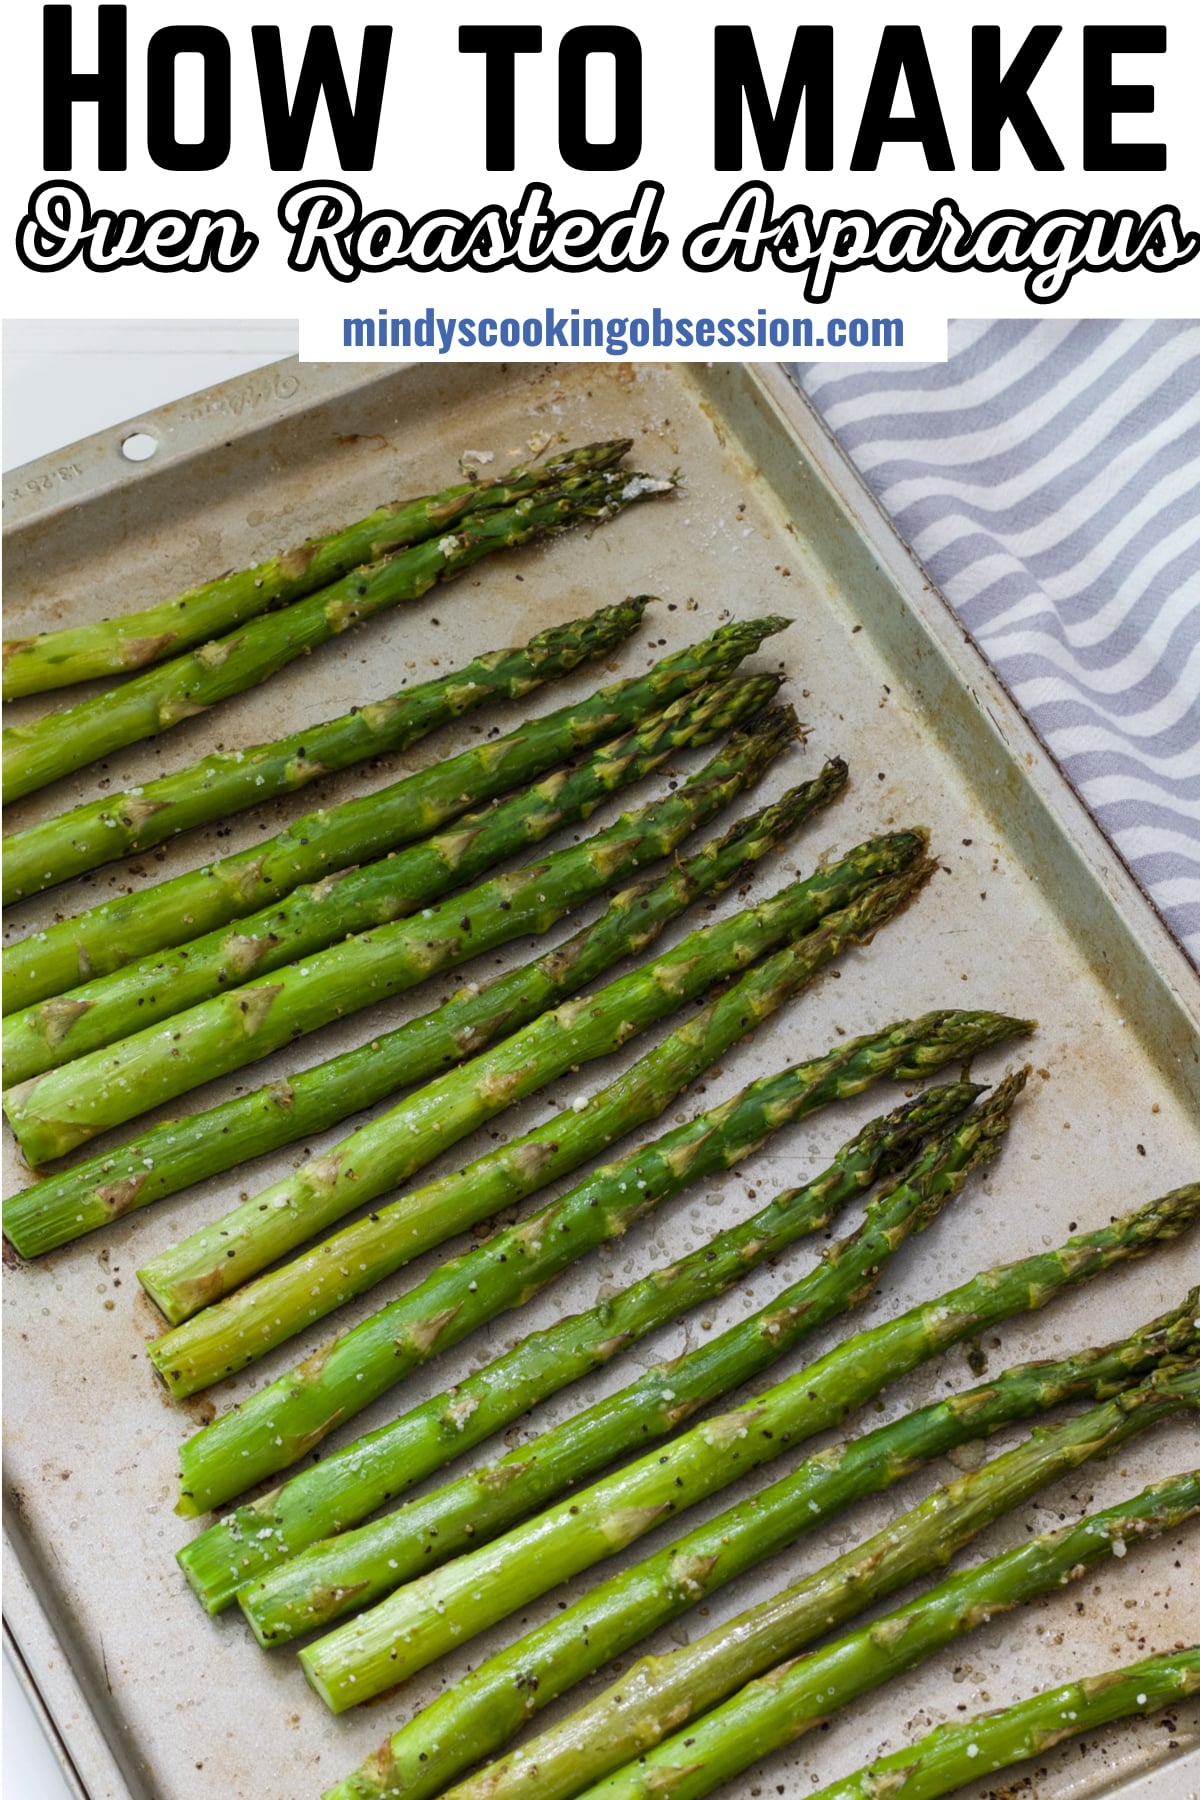 Craving a healthy and delicious side dish that's ready in under 20 minutes? Look no further than this easy oven-roasted asparagus recipe! With just fresh asparagus, olive oil, salt, and pepper, you can whip up perfect asparagus that complements a variety of main dishes. This easy recipe is perfect for beginners and novice cooks alike. Plus it's a delicious way to add more vegetables to your diet. via @mindyscookingobsession